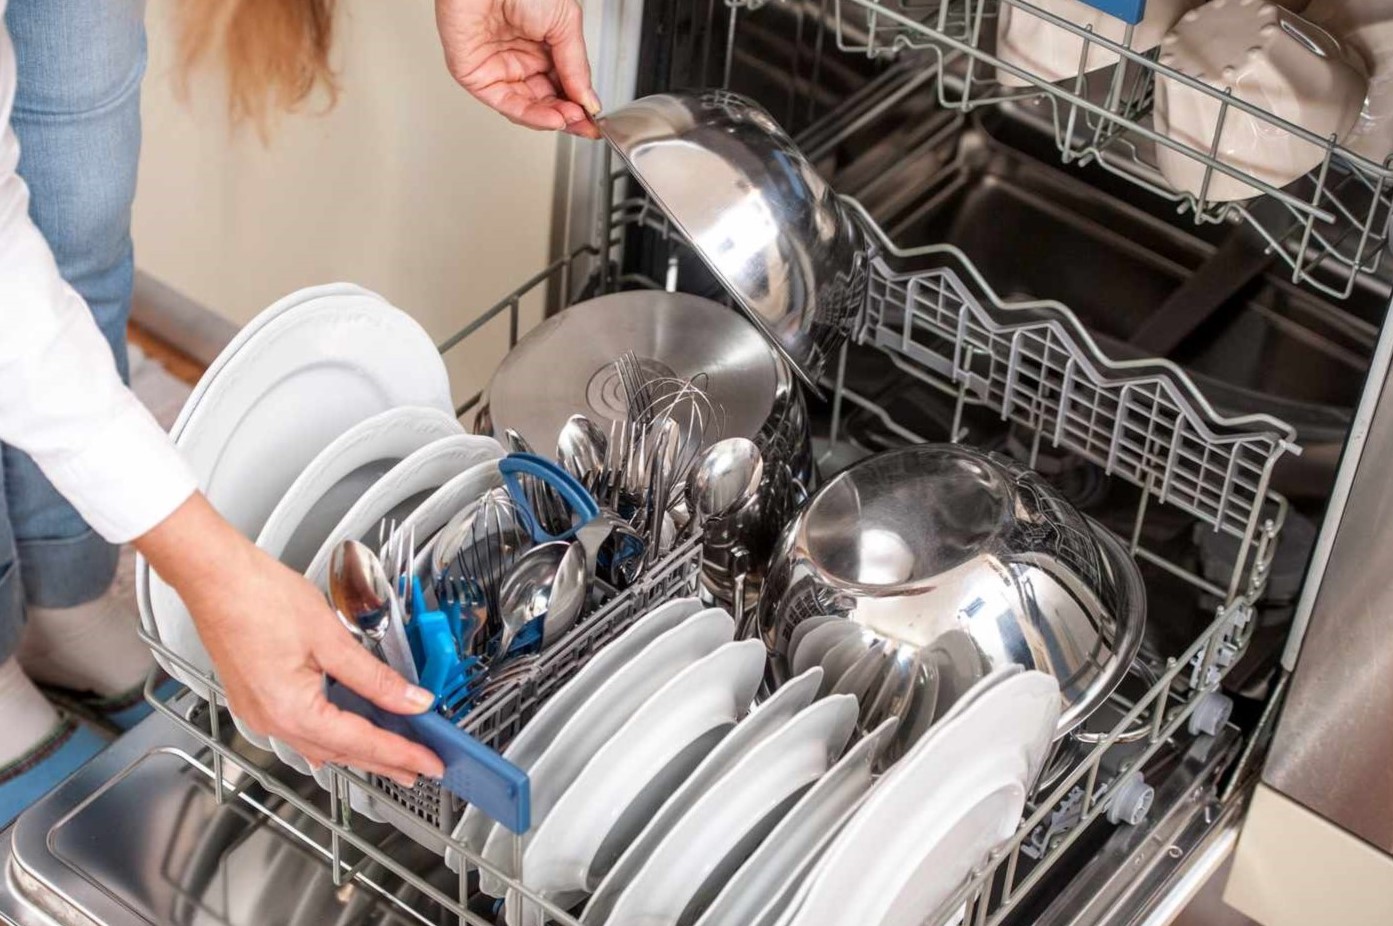 How To Organize A Dishwasher